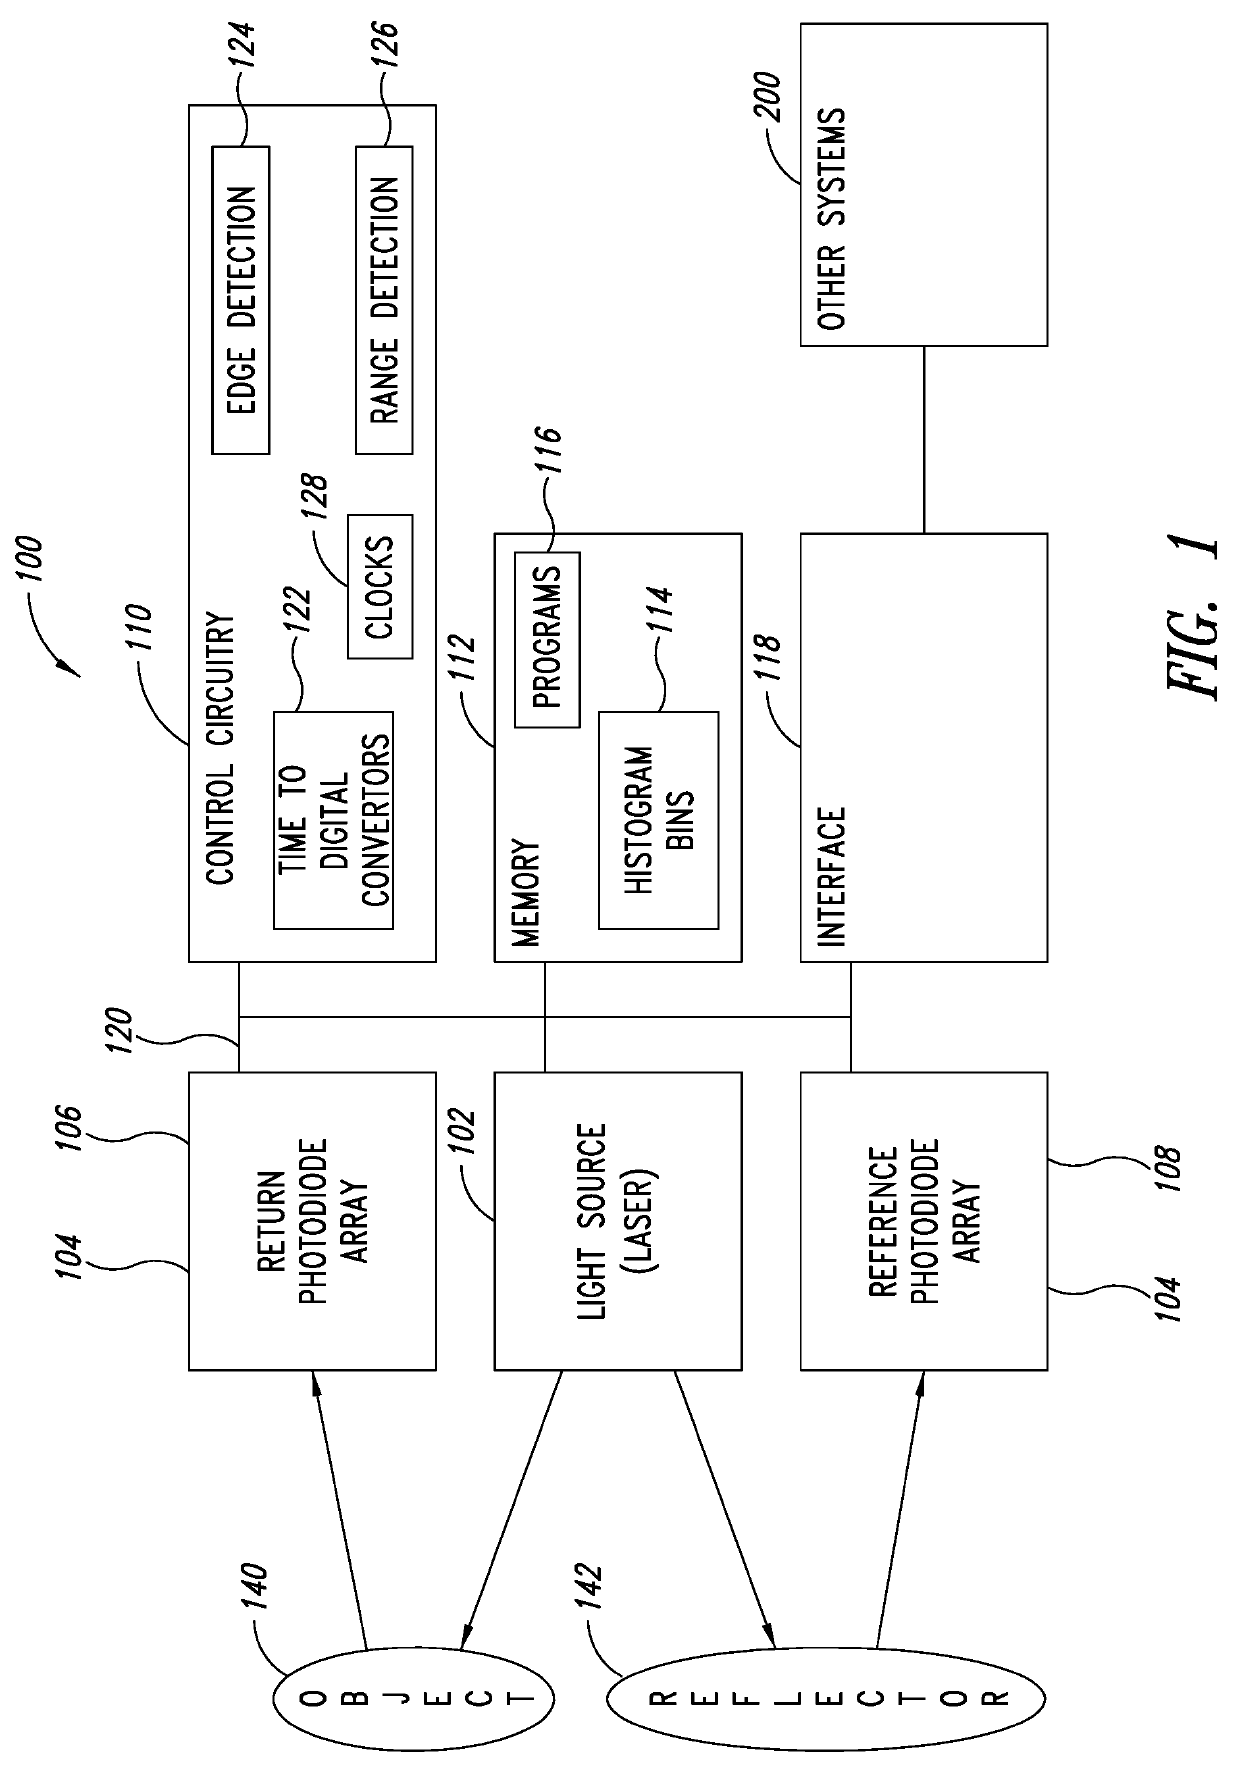 Time-of-flight imaging device, system and method